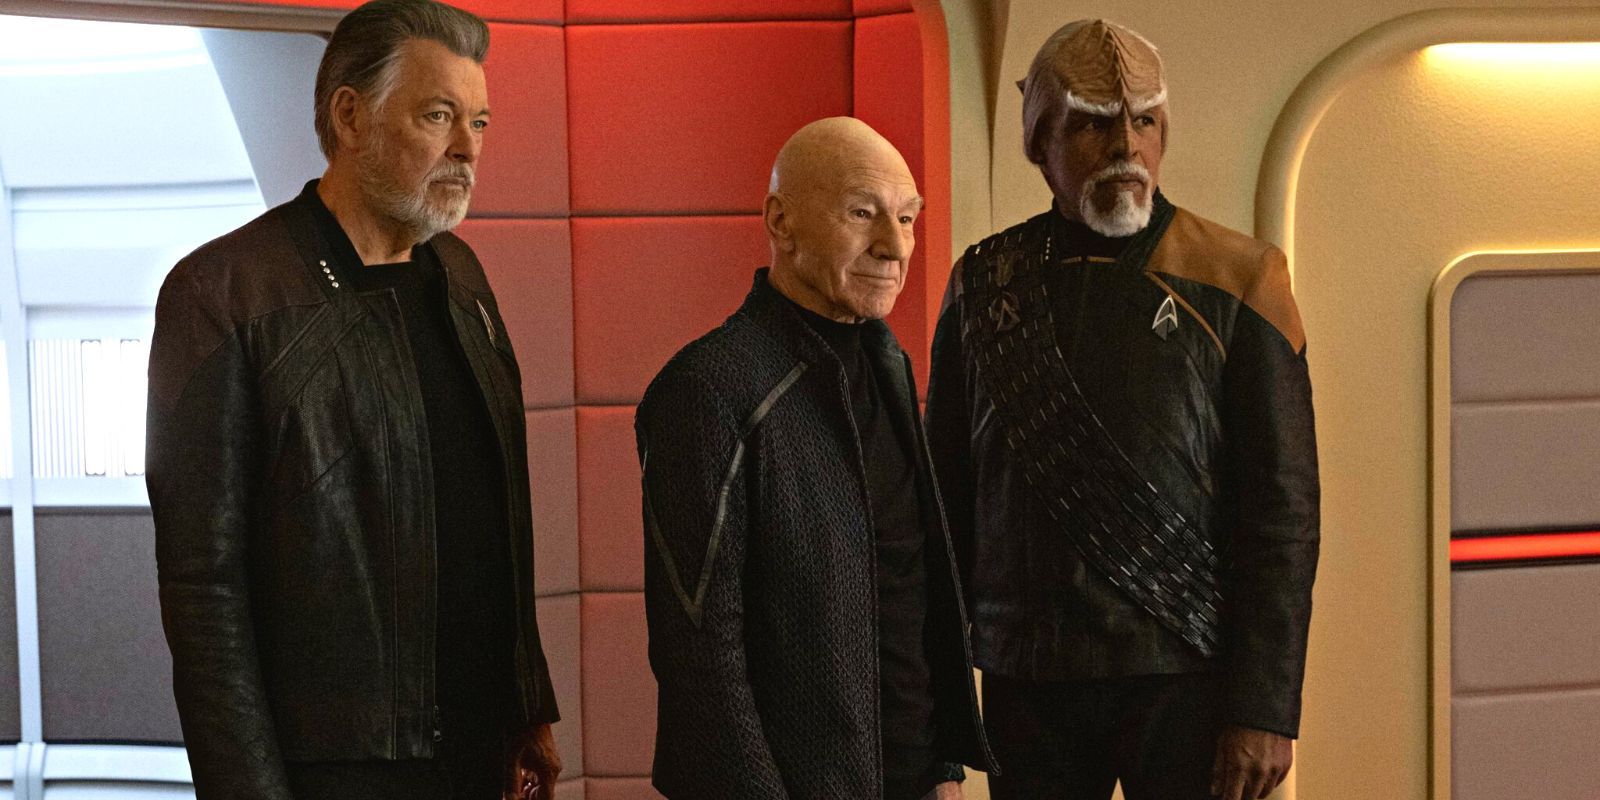 Jonathan Frakes, Patrick Stewart and Michael Dorn in costume on the set of Picard